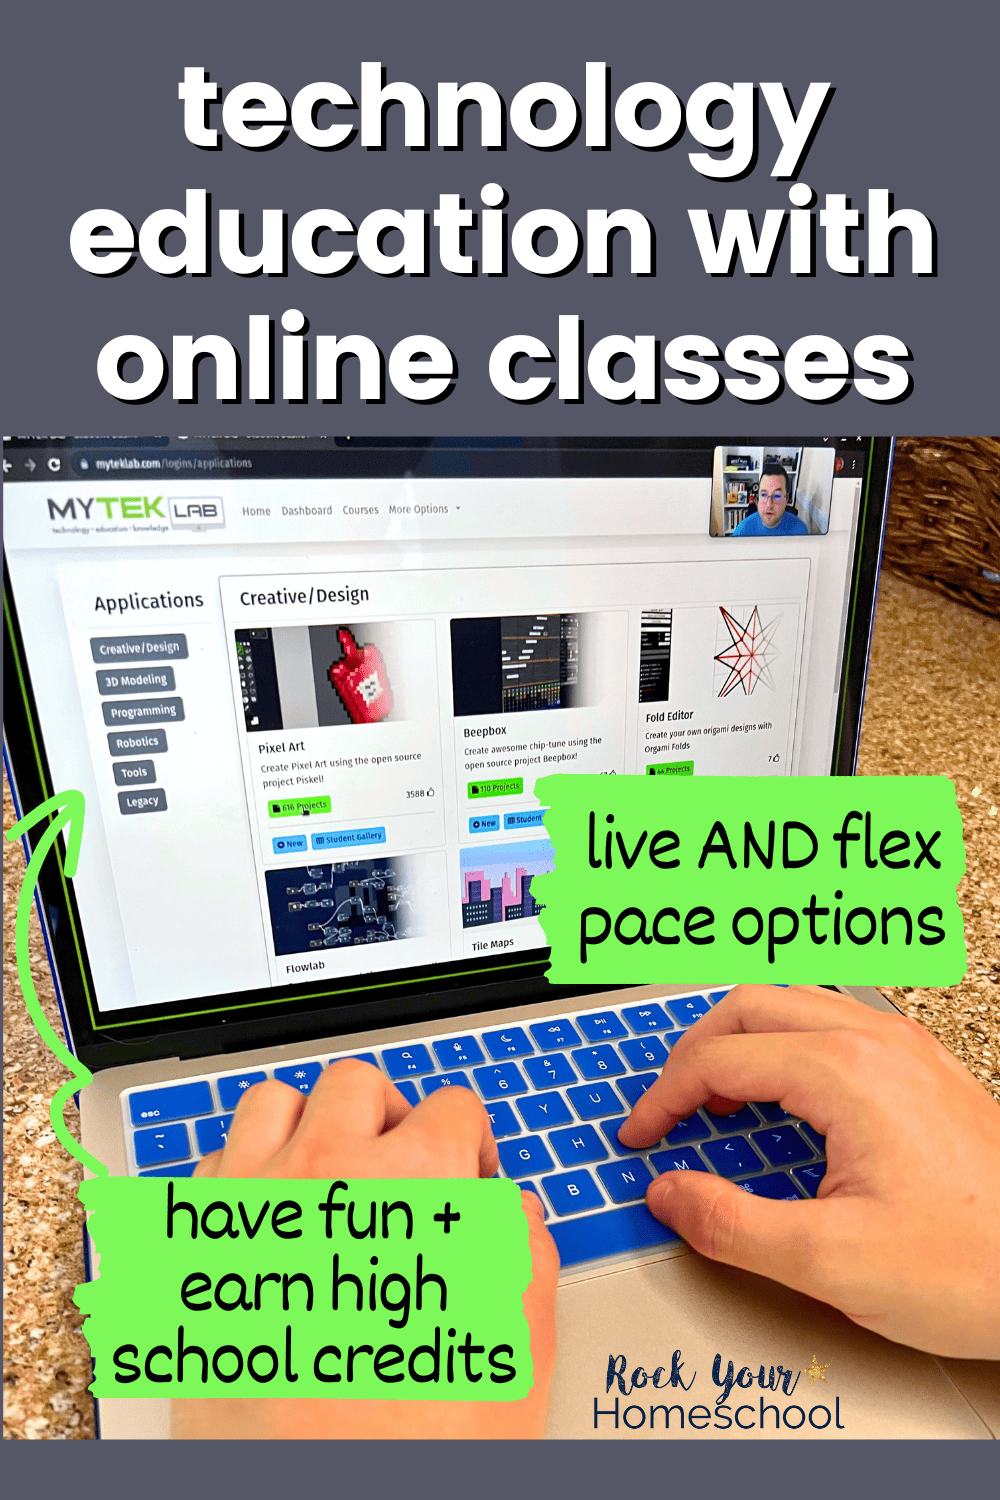 How These Online Technology Education Classes Make Learning Fun